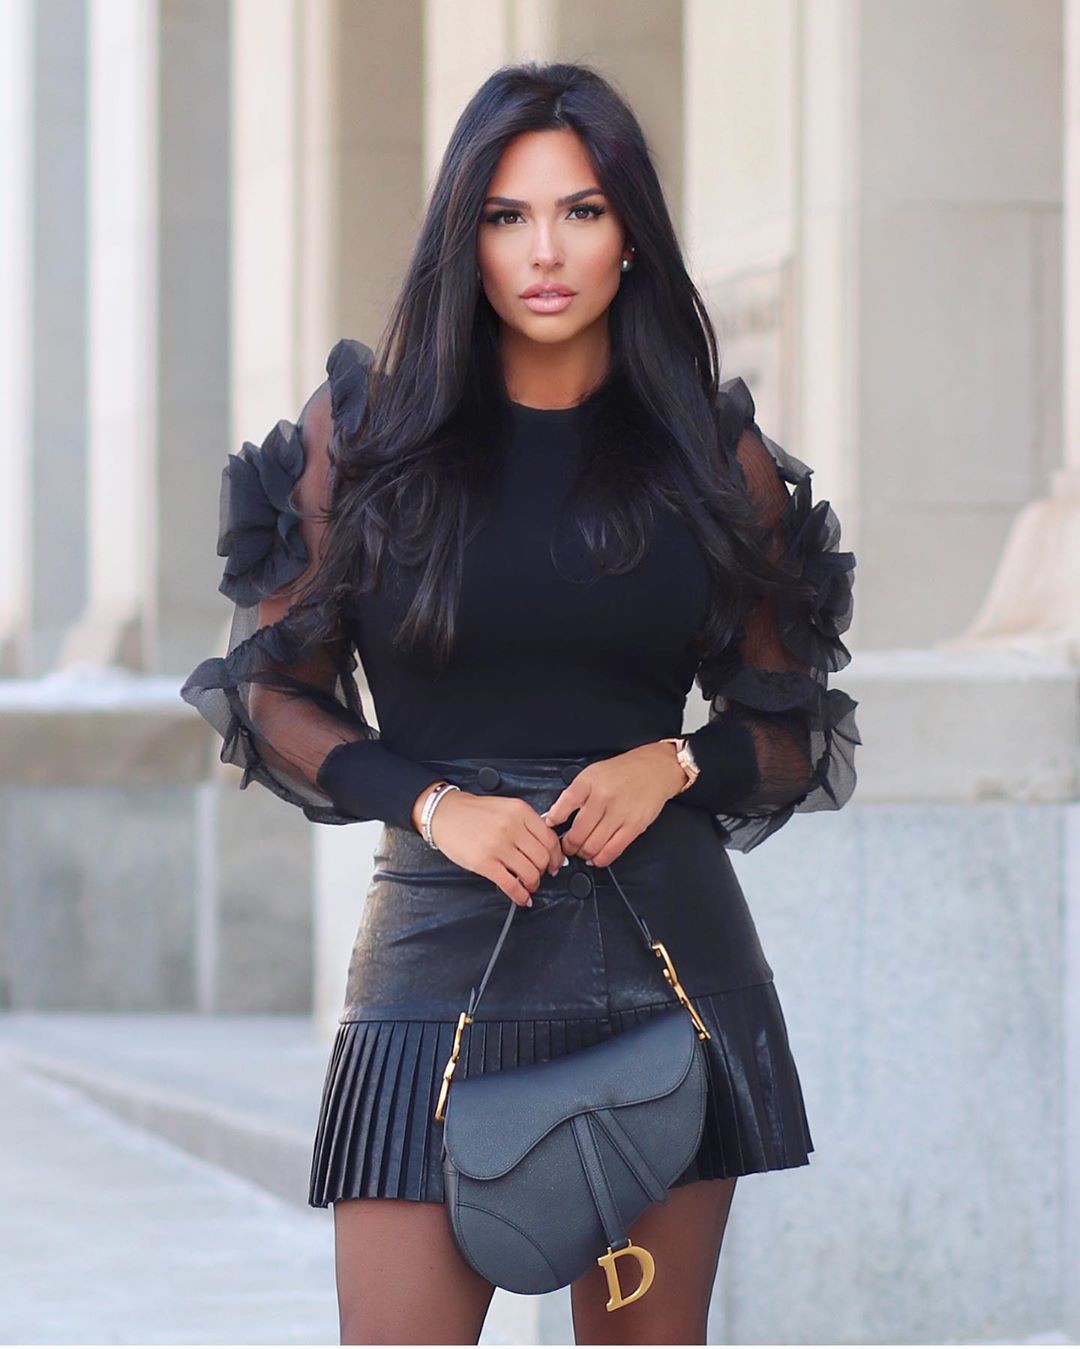 black colour outfit, you must try with shorts, smooth legs, outfit ...